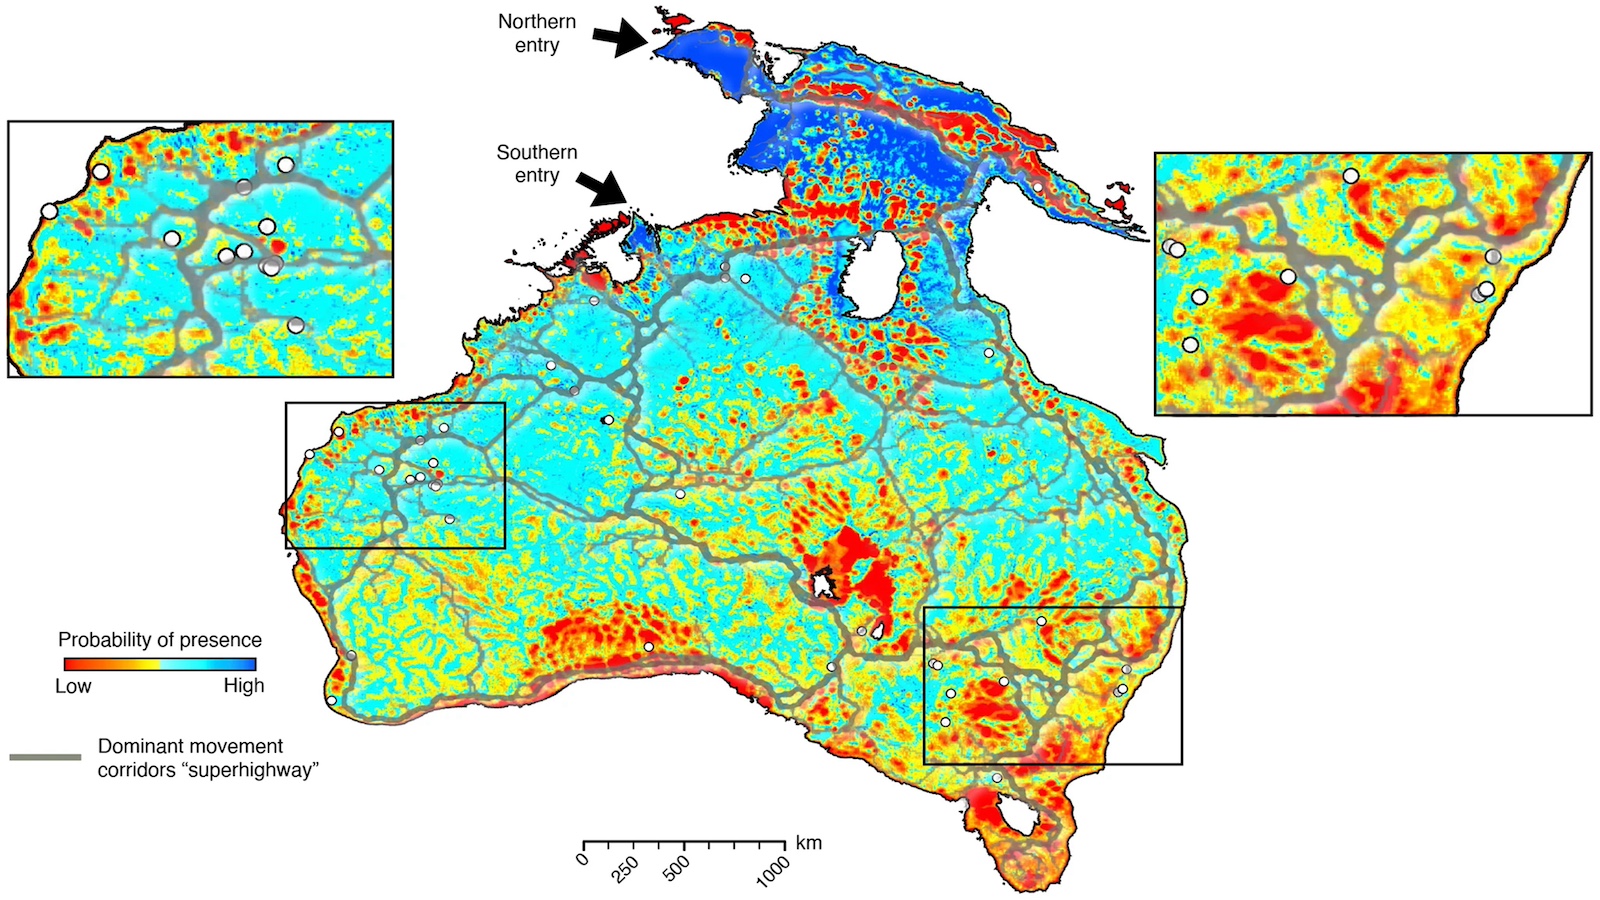 A map of Australia showing probability of species presence with color gradients from low (blue) to high (red). Insets display detailed regions. Arrows indicate the Northern and Southern entry points.